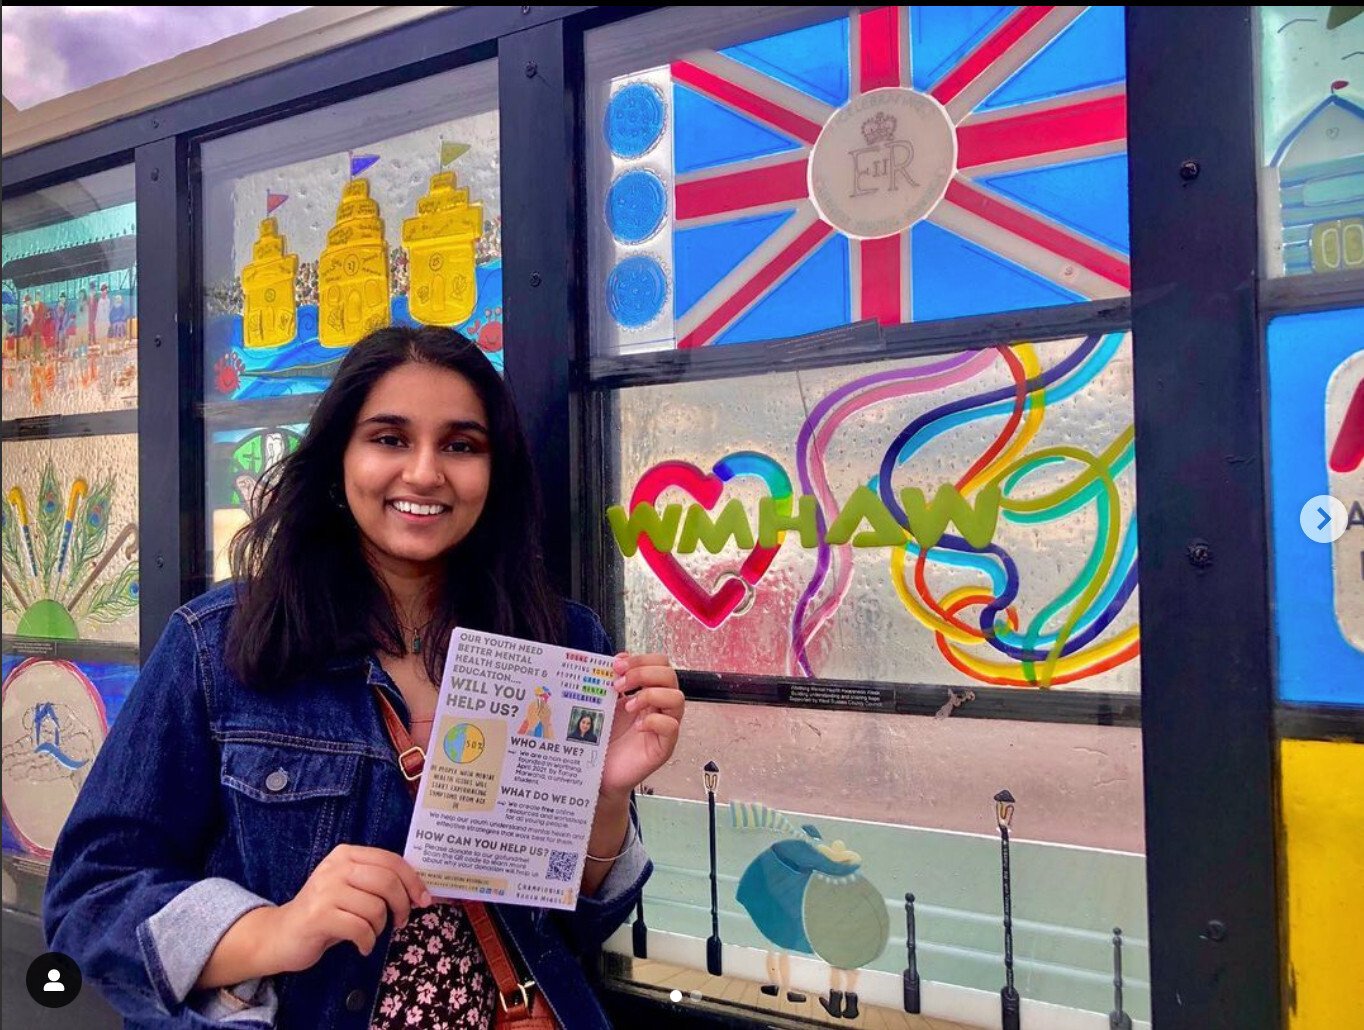 British-Indian student Tanya Marwaha has set up a programme to support young people with their mental health. Photo: Handout